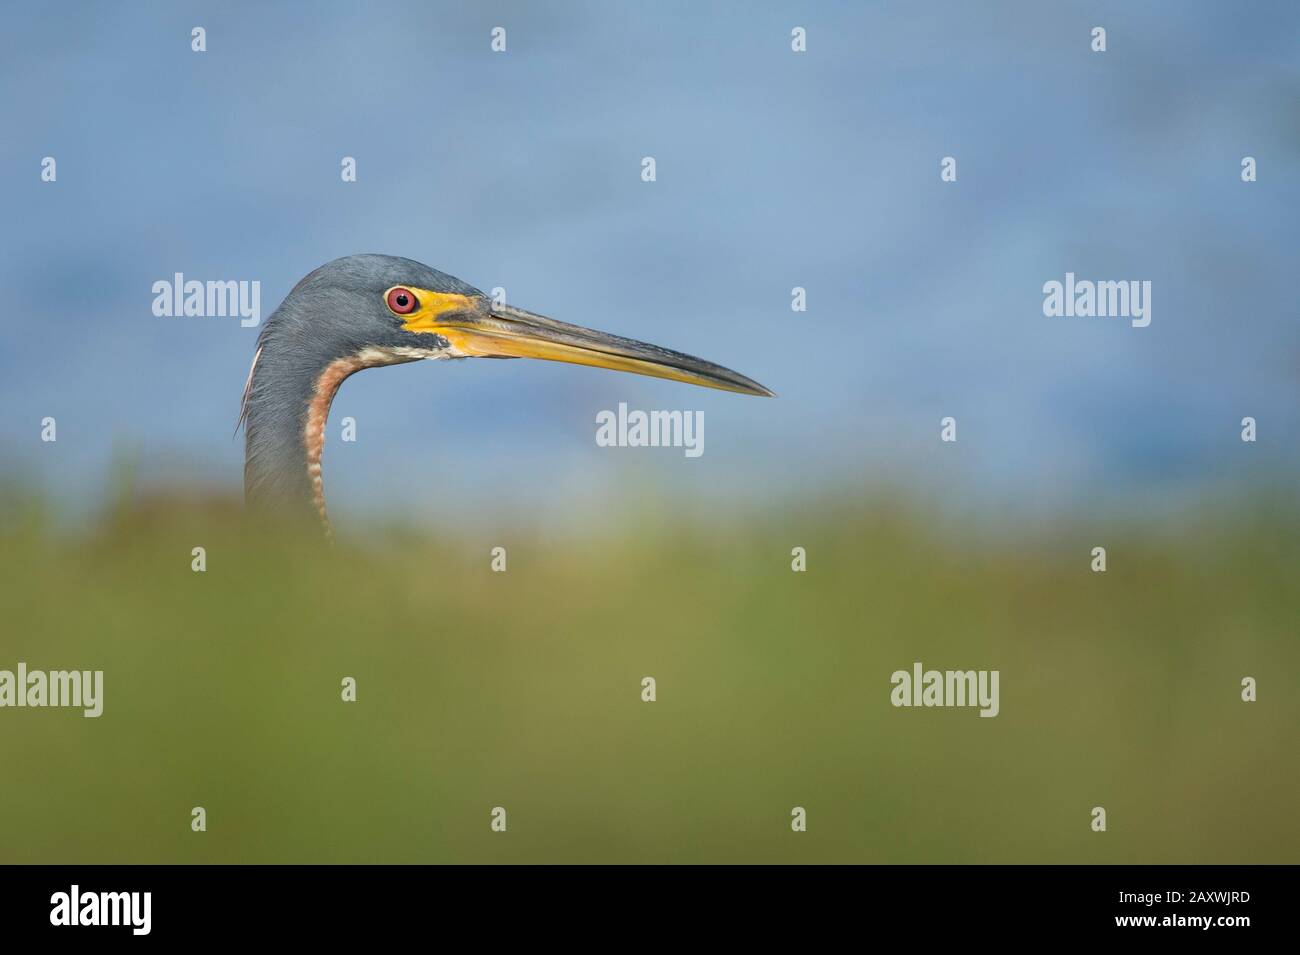 A Tricolored Heron peeks from behind some bright green grass with a smooth water background in the bright sunlight. Stock Photo